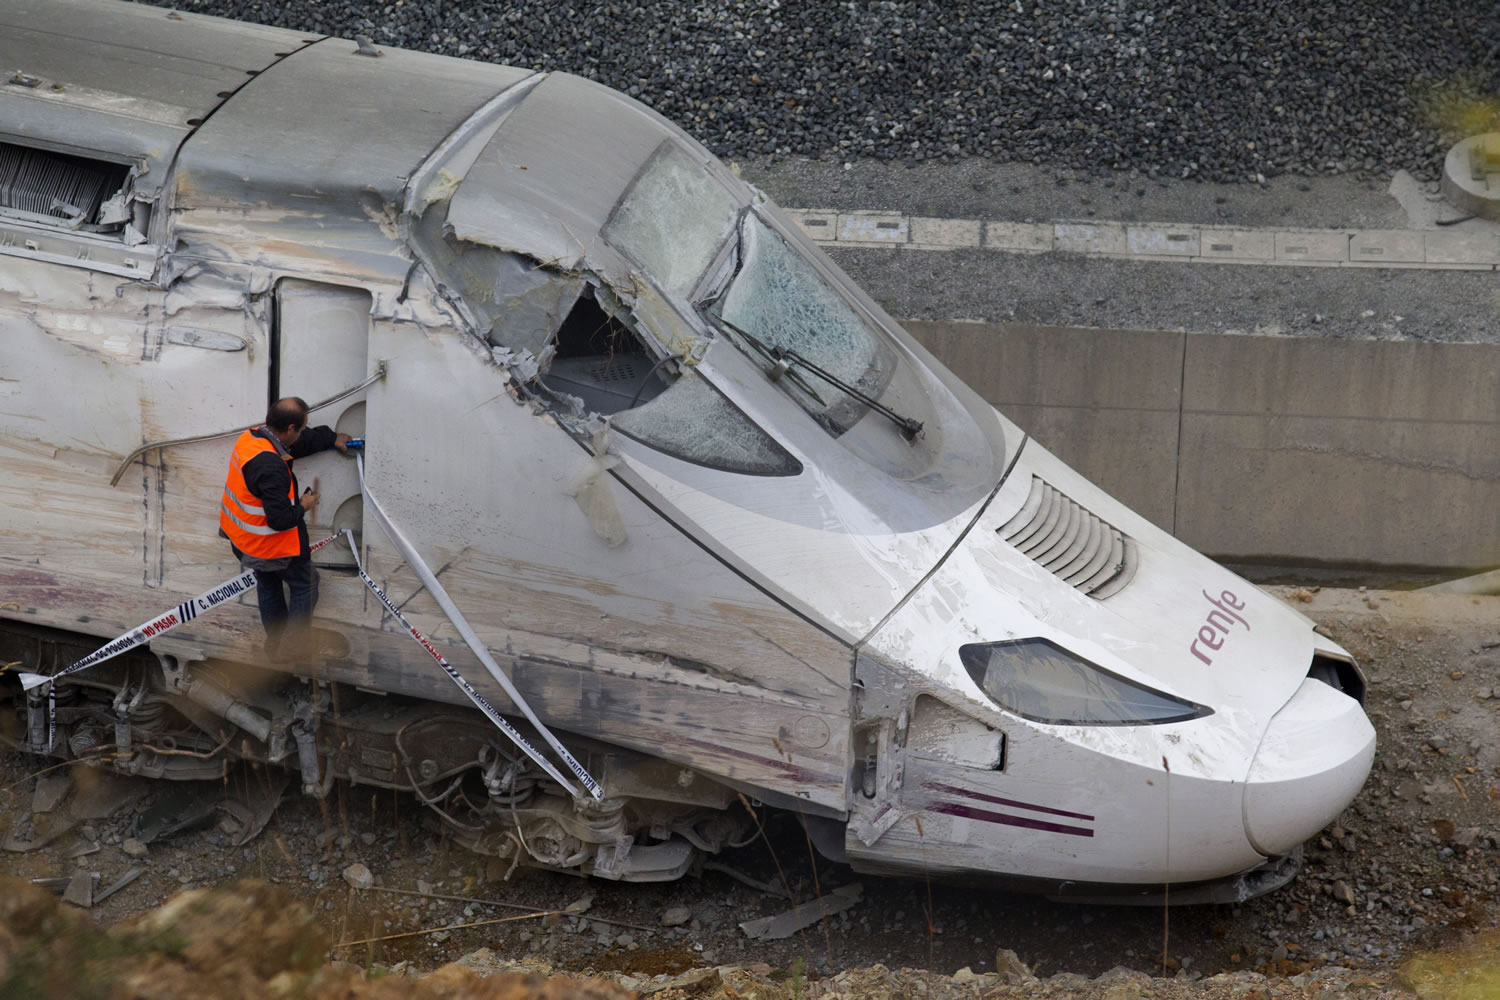 A rail personnel worker checks the cabin of a derailed train following an accident in Santiago de Compostela, Spain, on July 25.